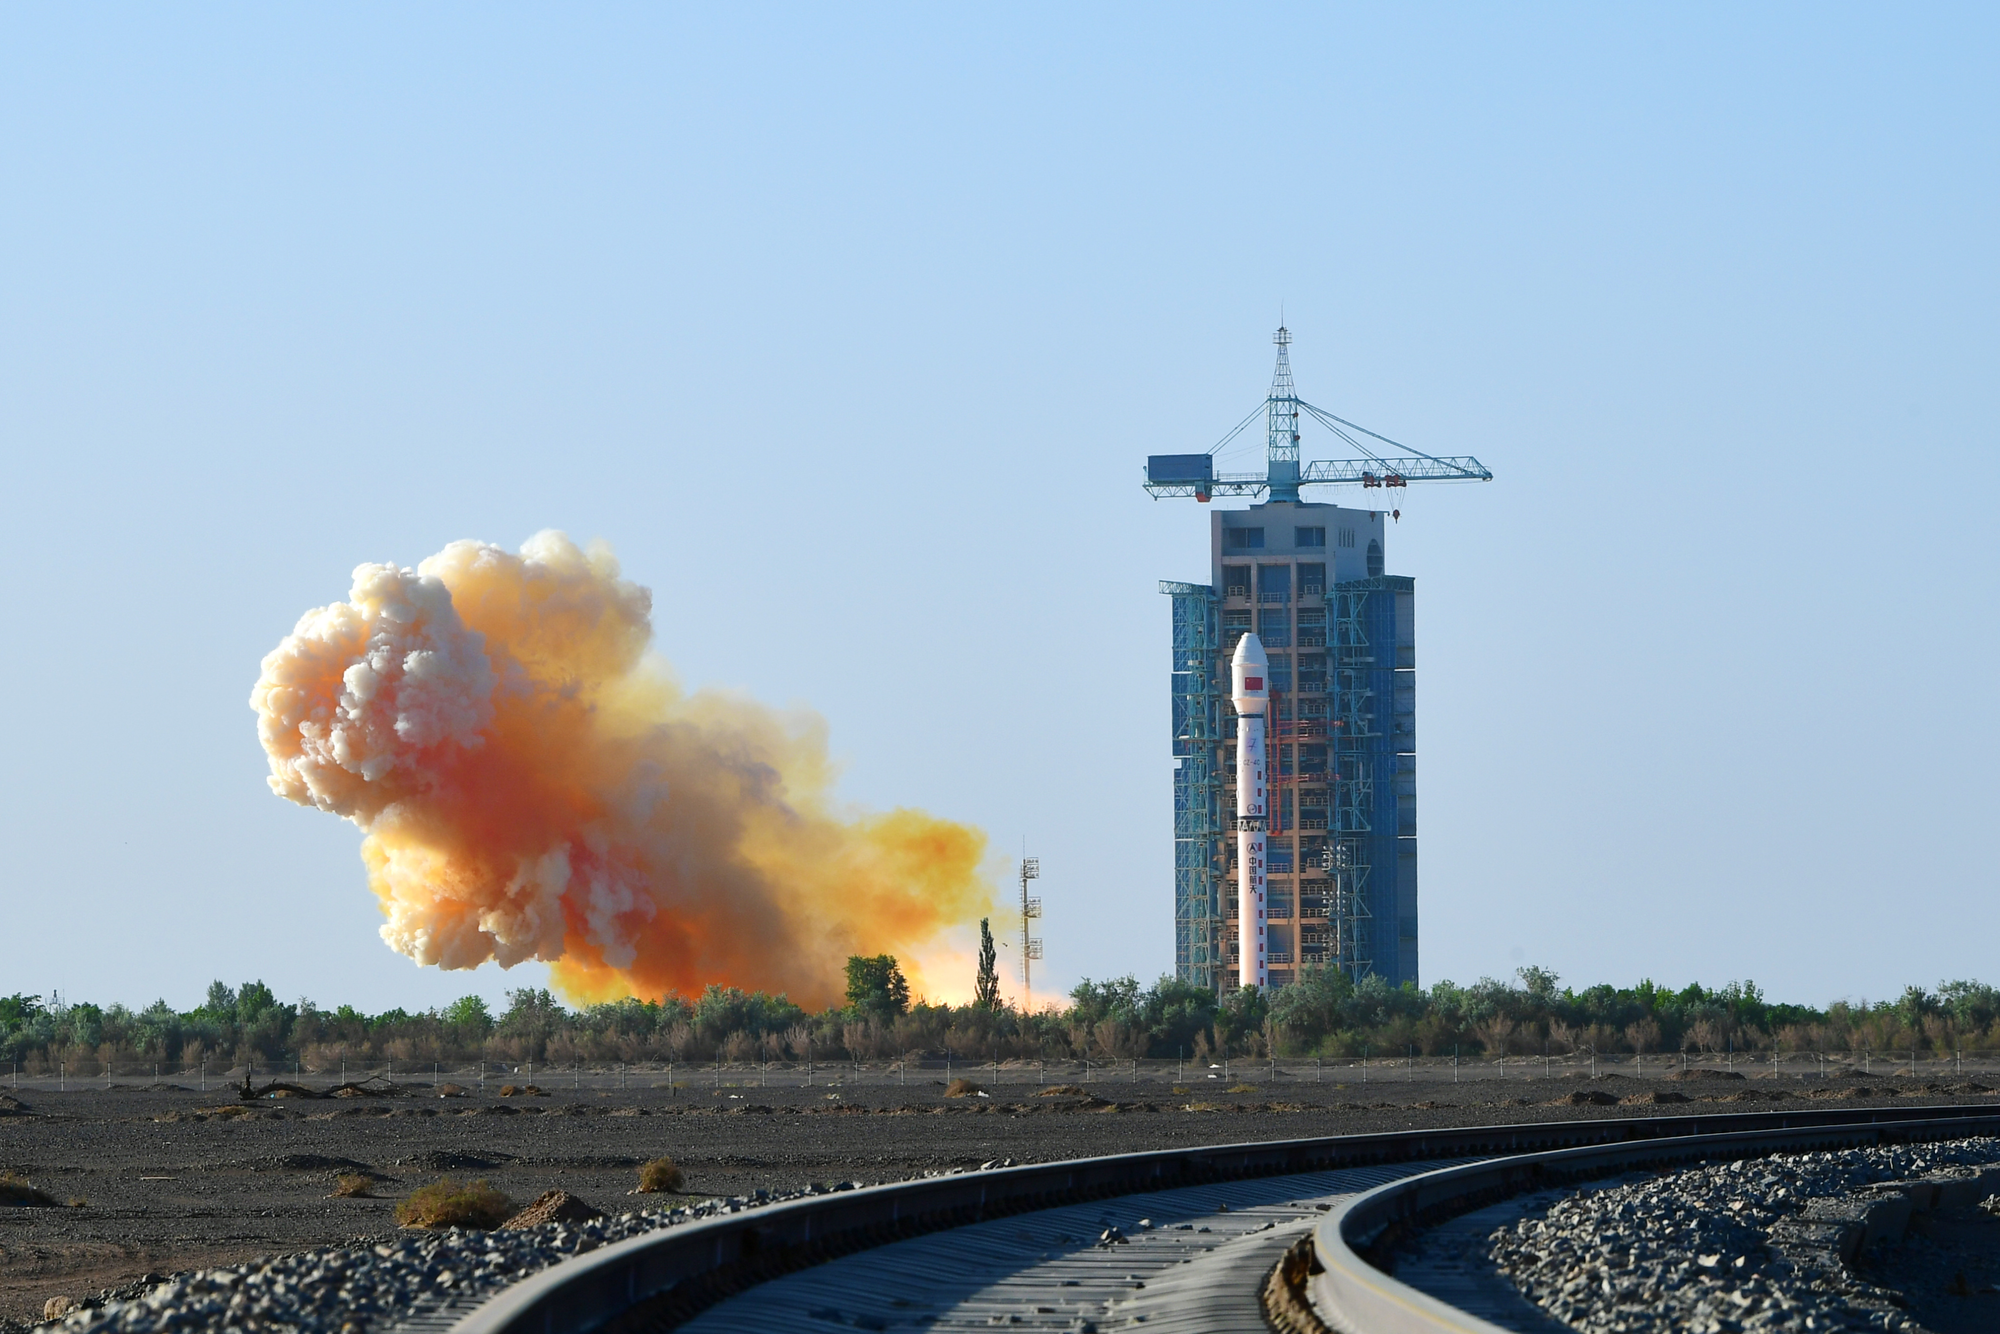 The Long March 4C Y50 vehicle lifting off from the Jiuquan Satellite Launch Center.